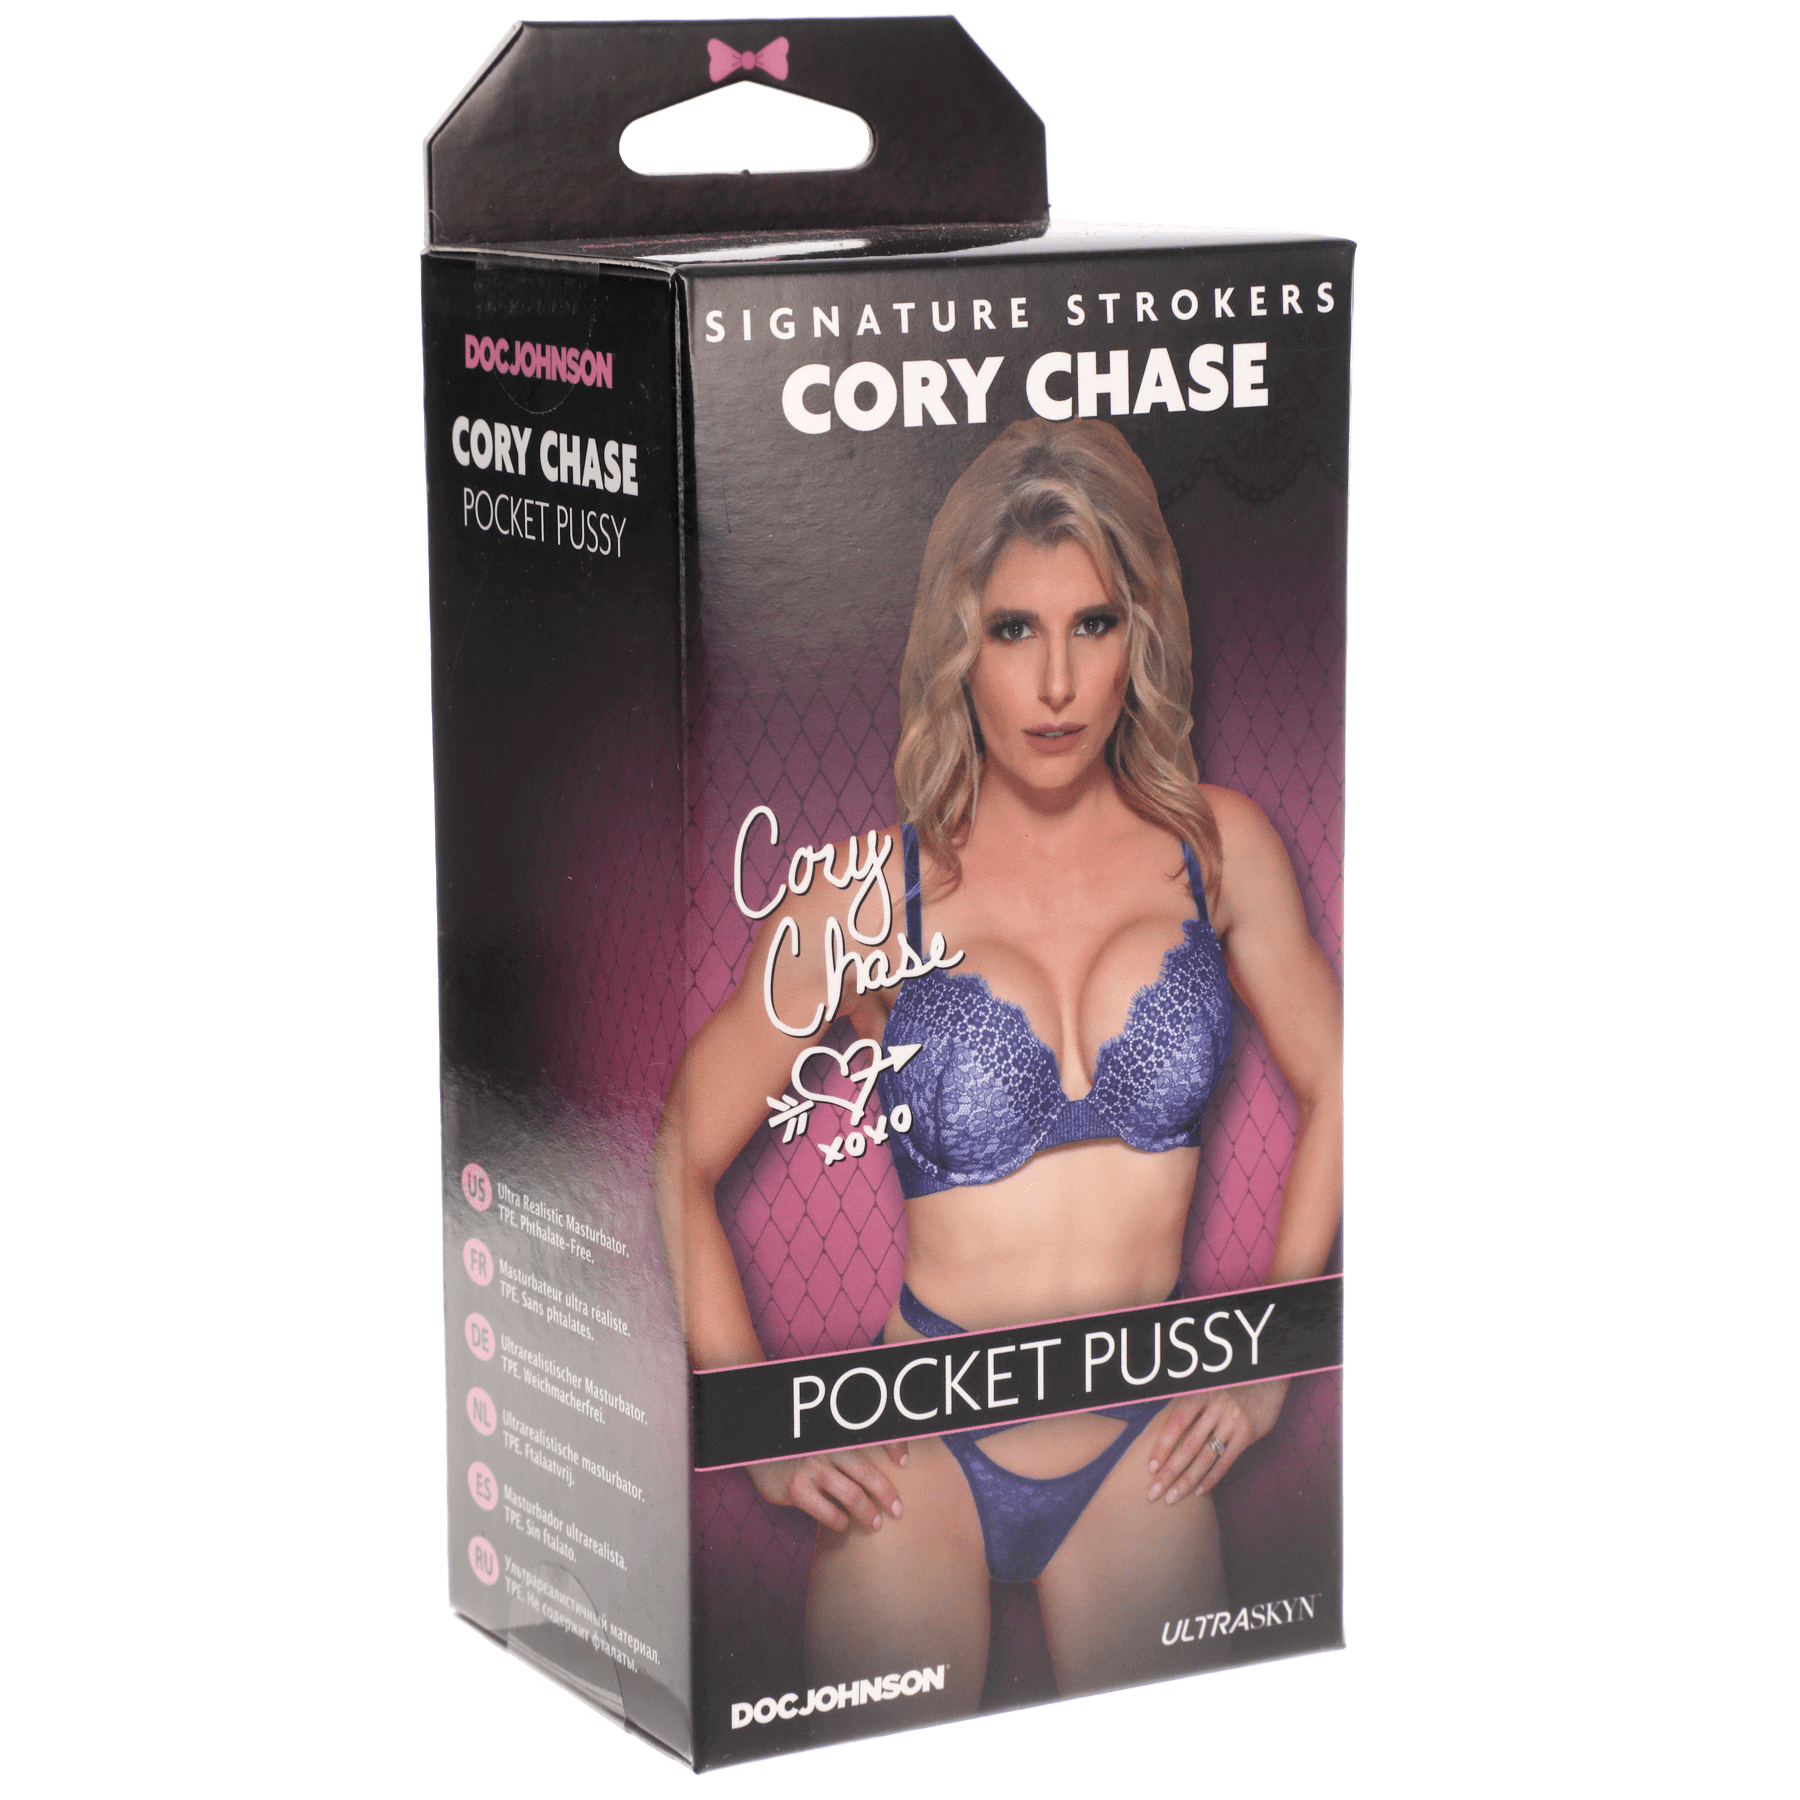 Signature Strokers Cory Chase ULTRASKYN Pocket Pussy - Thorn & Feather Sex Toy Canada